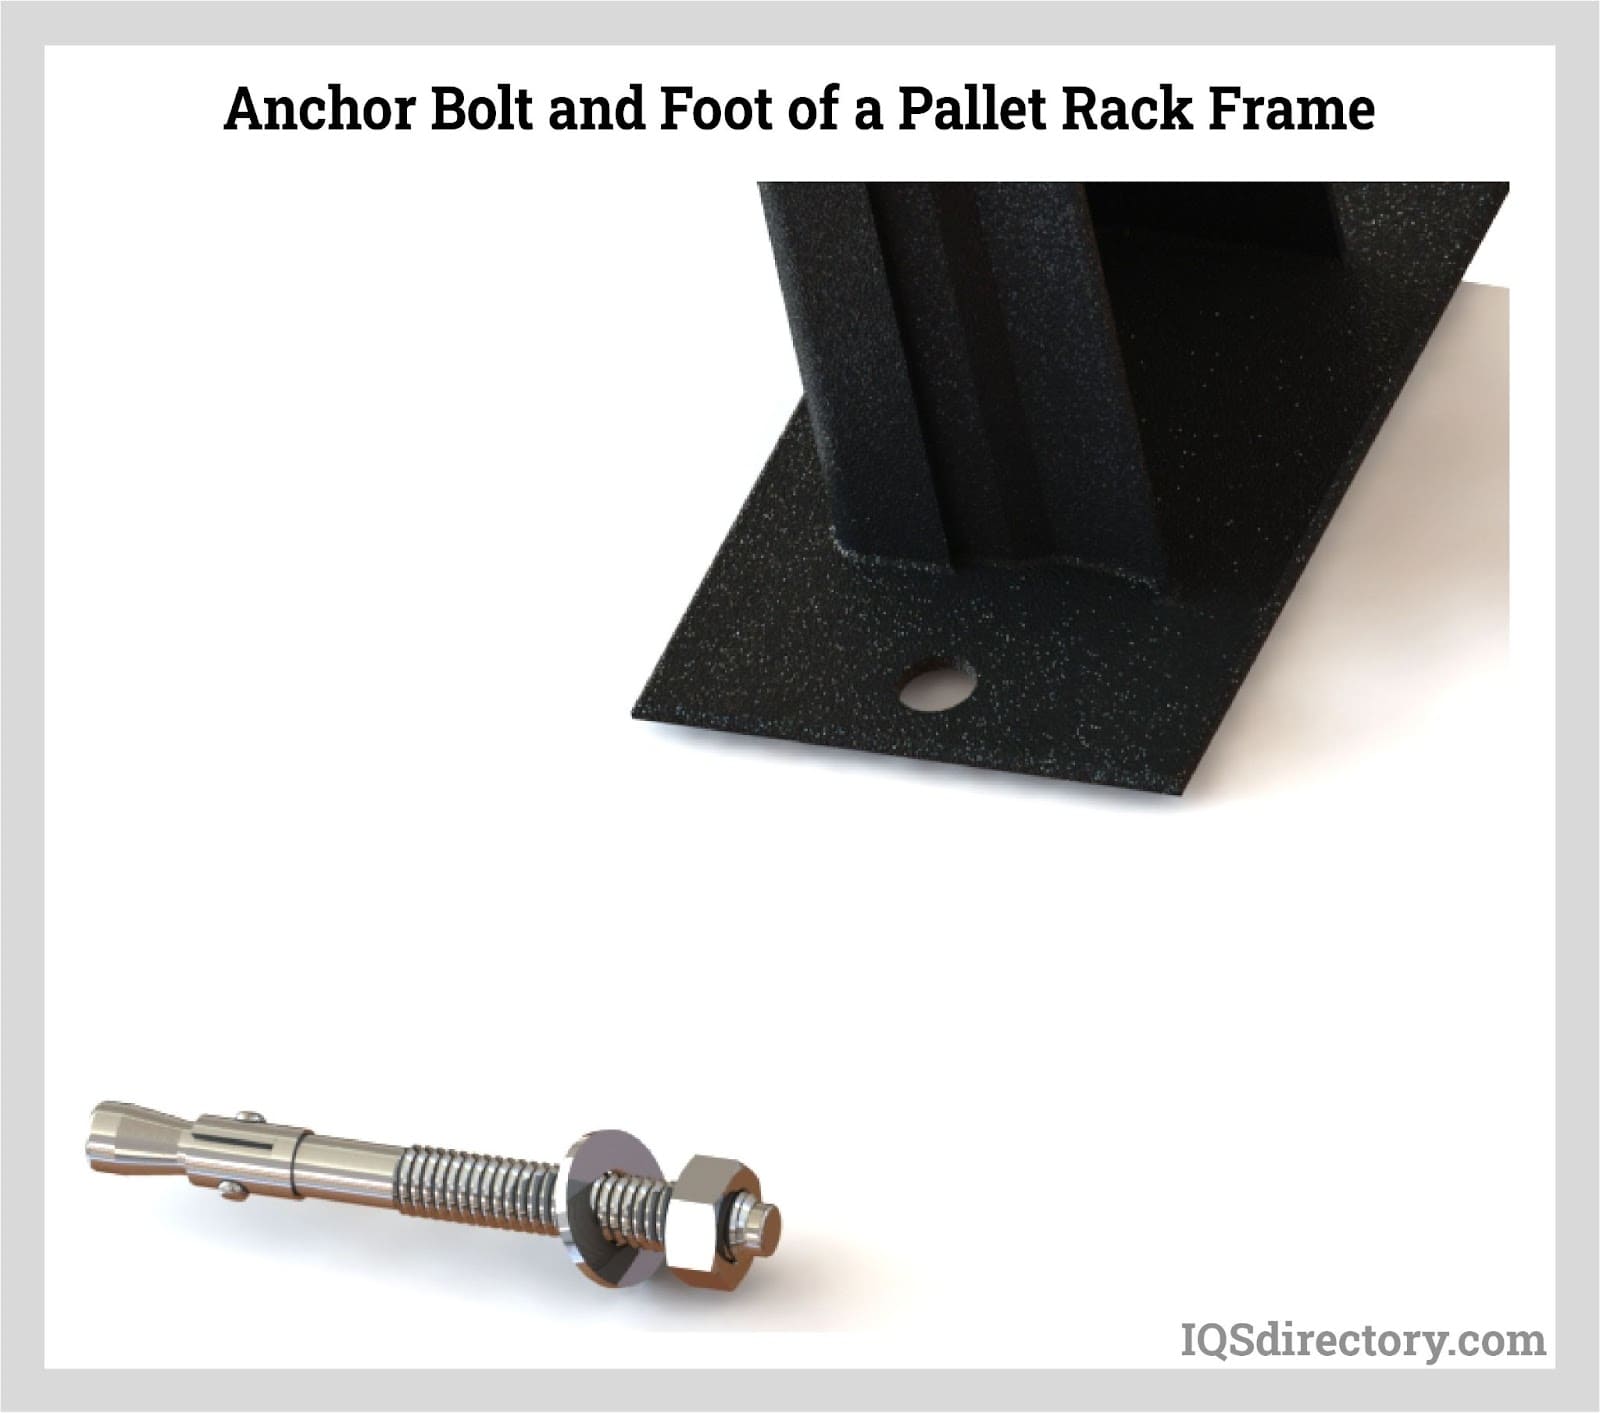 Anchor Bolt and Foot of a Pallet Rack Frame